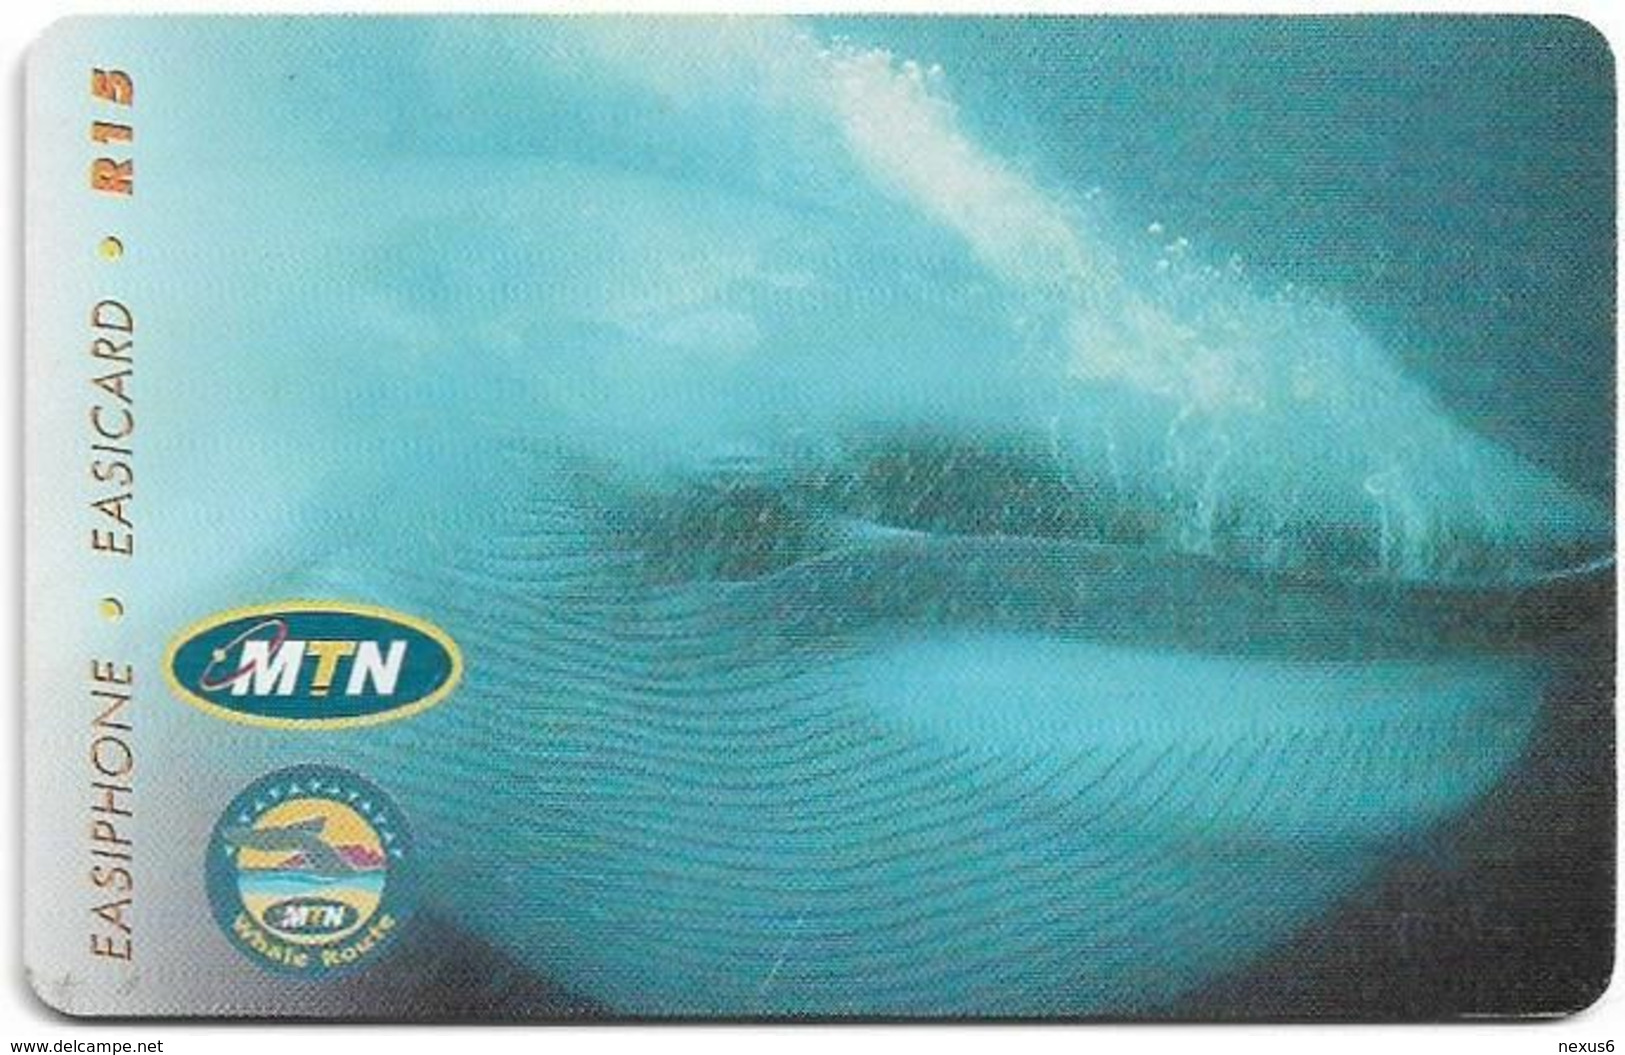 S. Africa - MTN - Whale Route Reprint - Whale's Head #1, SC8, 2003, 100.000ex, Used - Südafrika